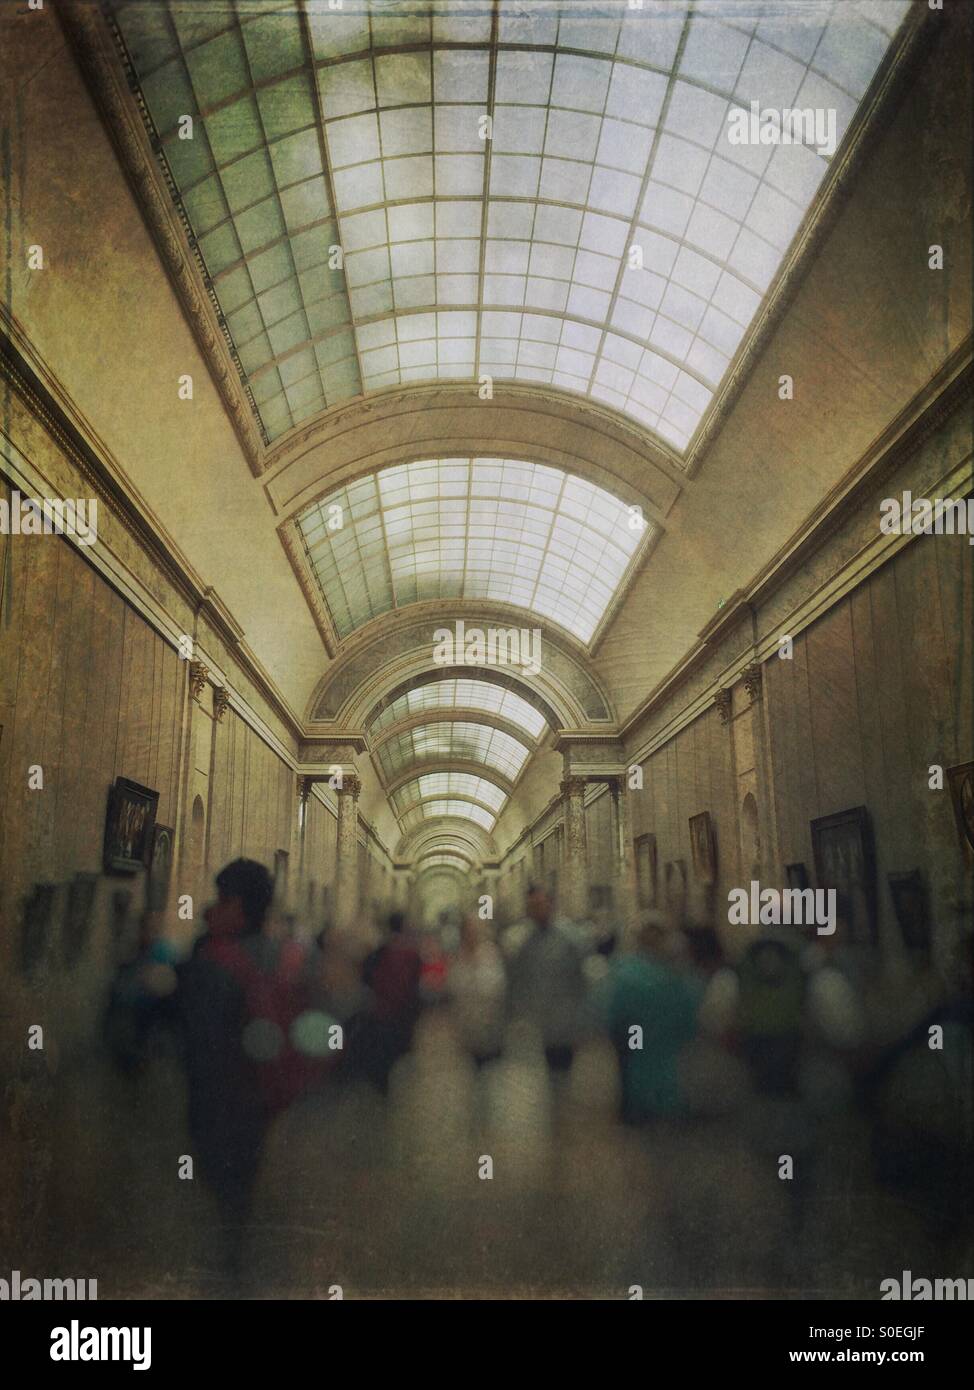 Crowd of tourists at the Grande Galerie or Grand Gallery in the Louvre museum in Paris, France. Vintage texture overlay. Stock Photo